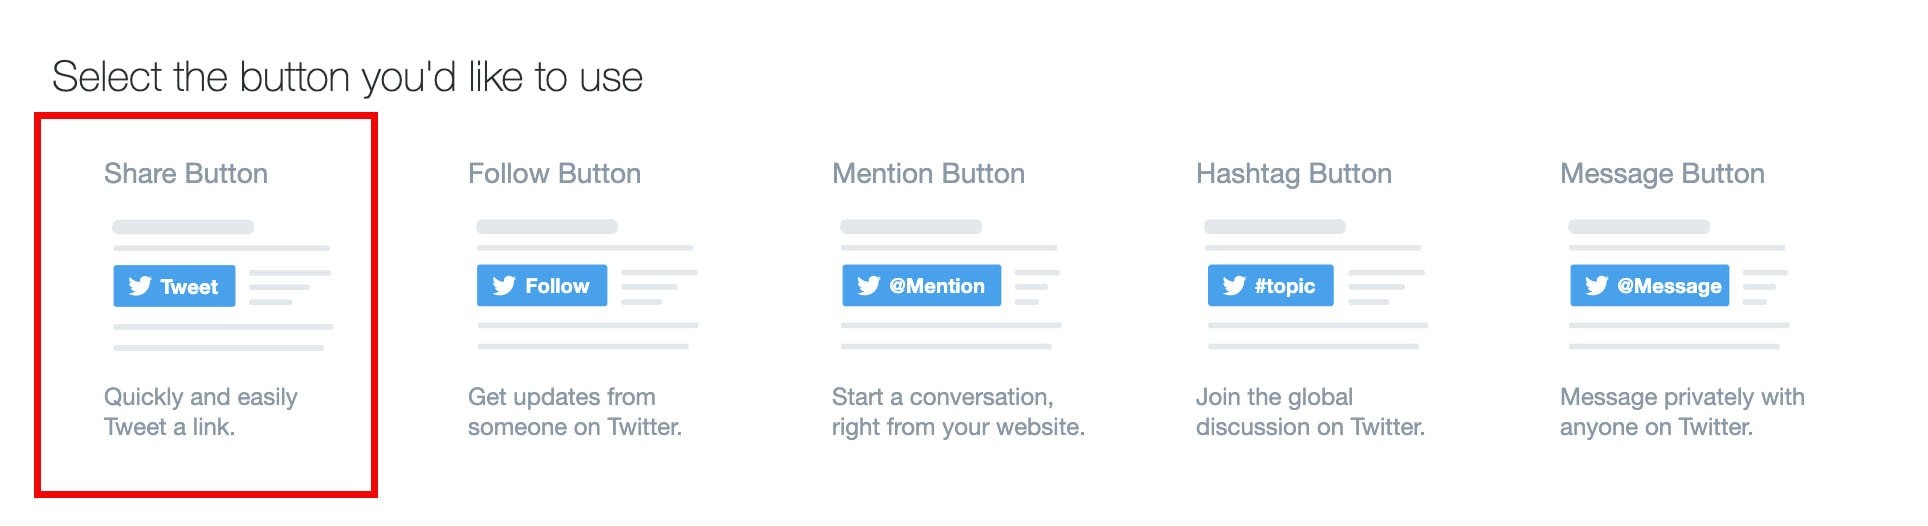 twitter share button on twitter's developer page